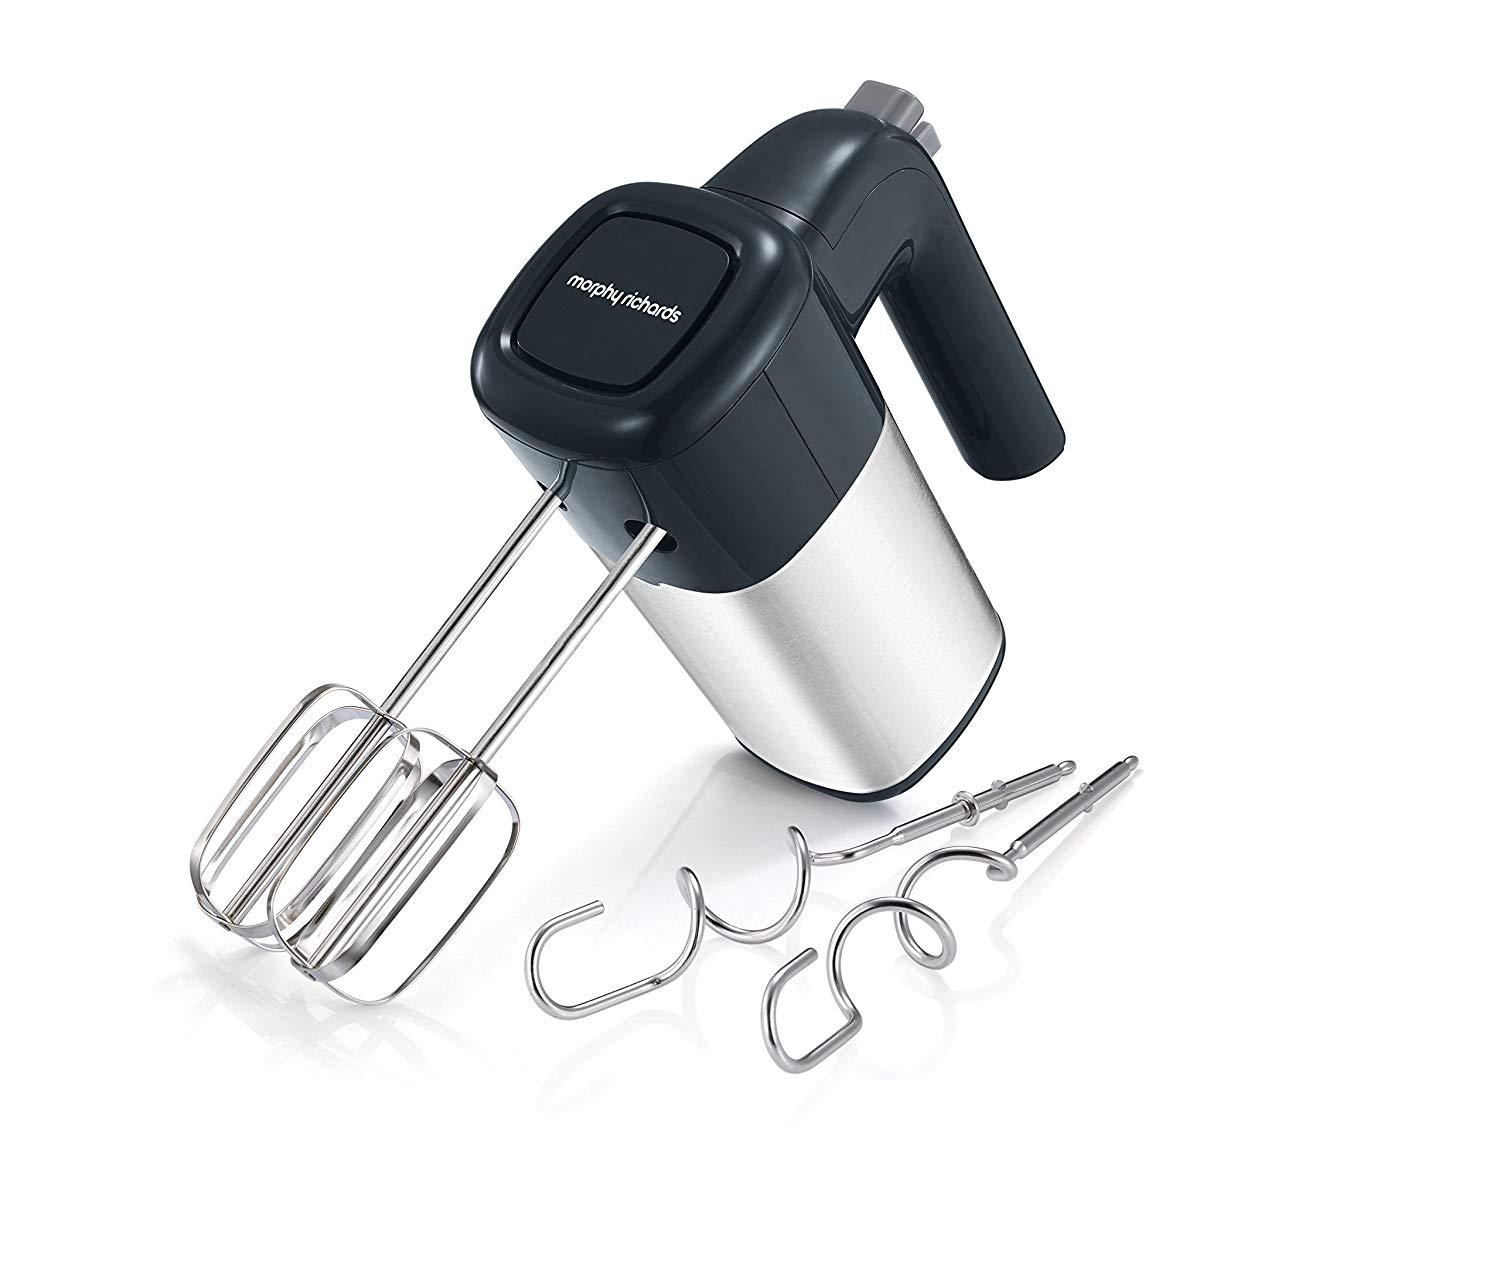 Moprhy Richards 400512 Total Control Hand Mixer Grey